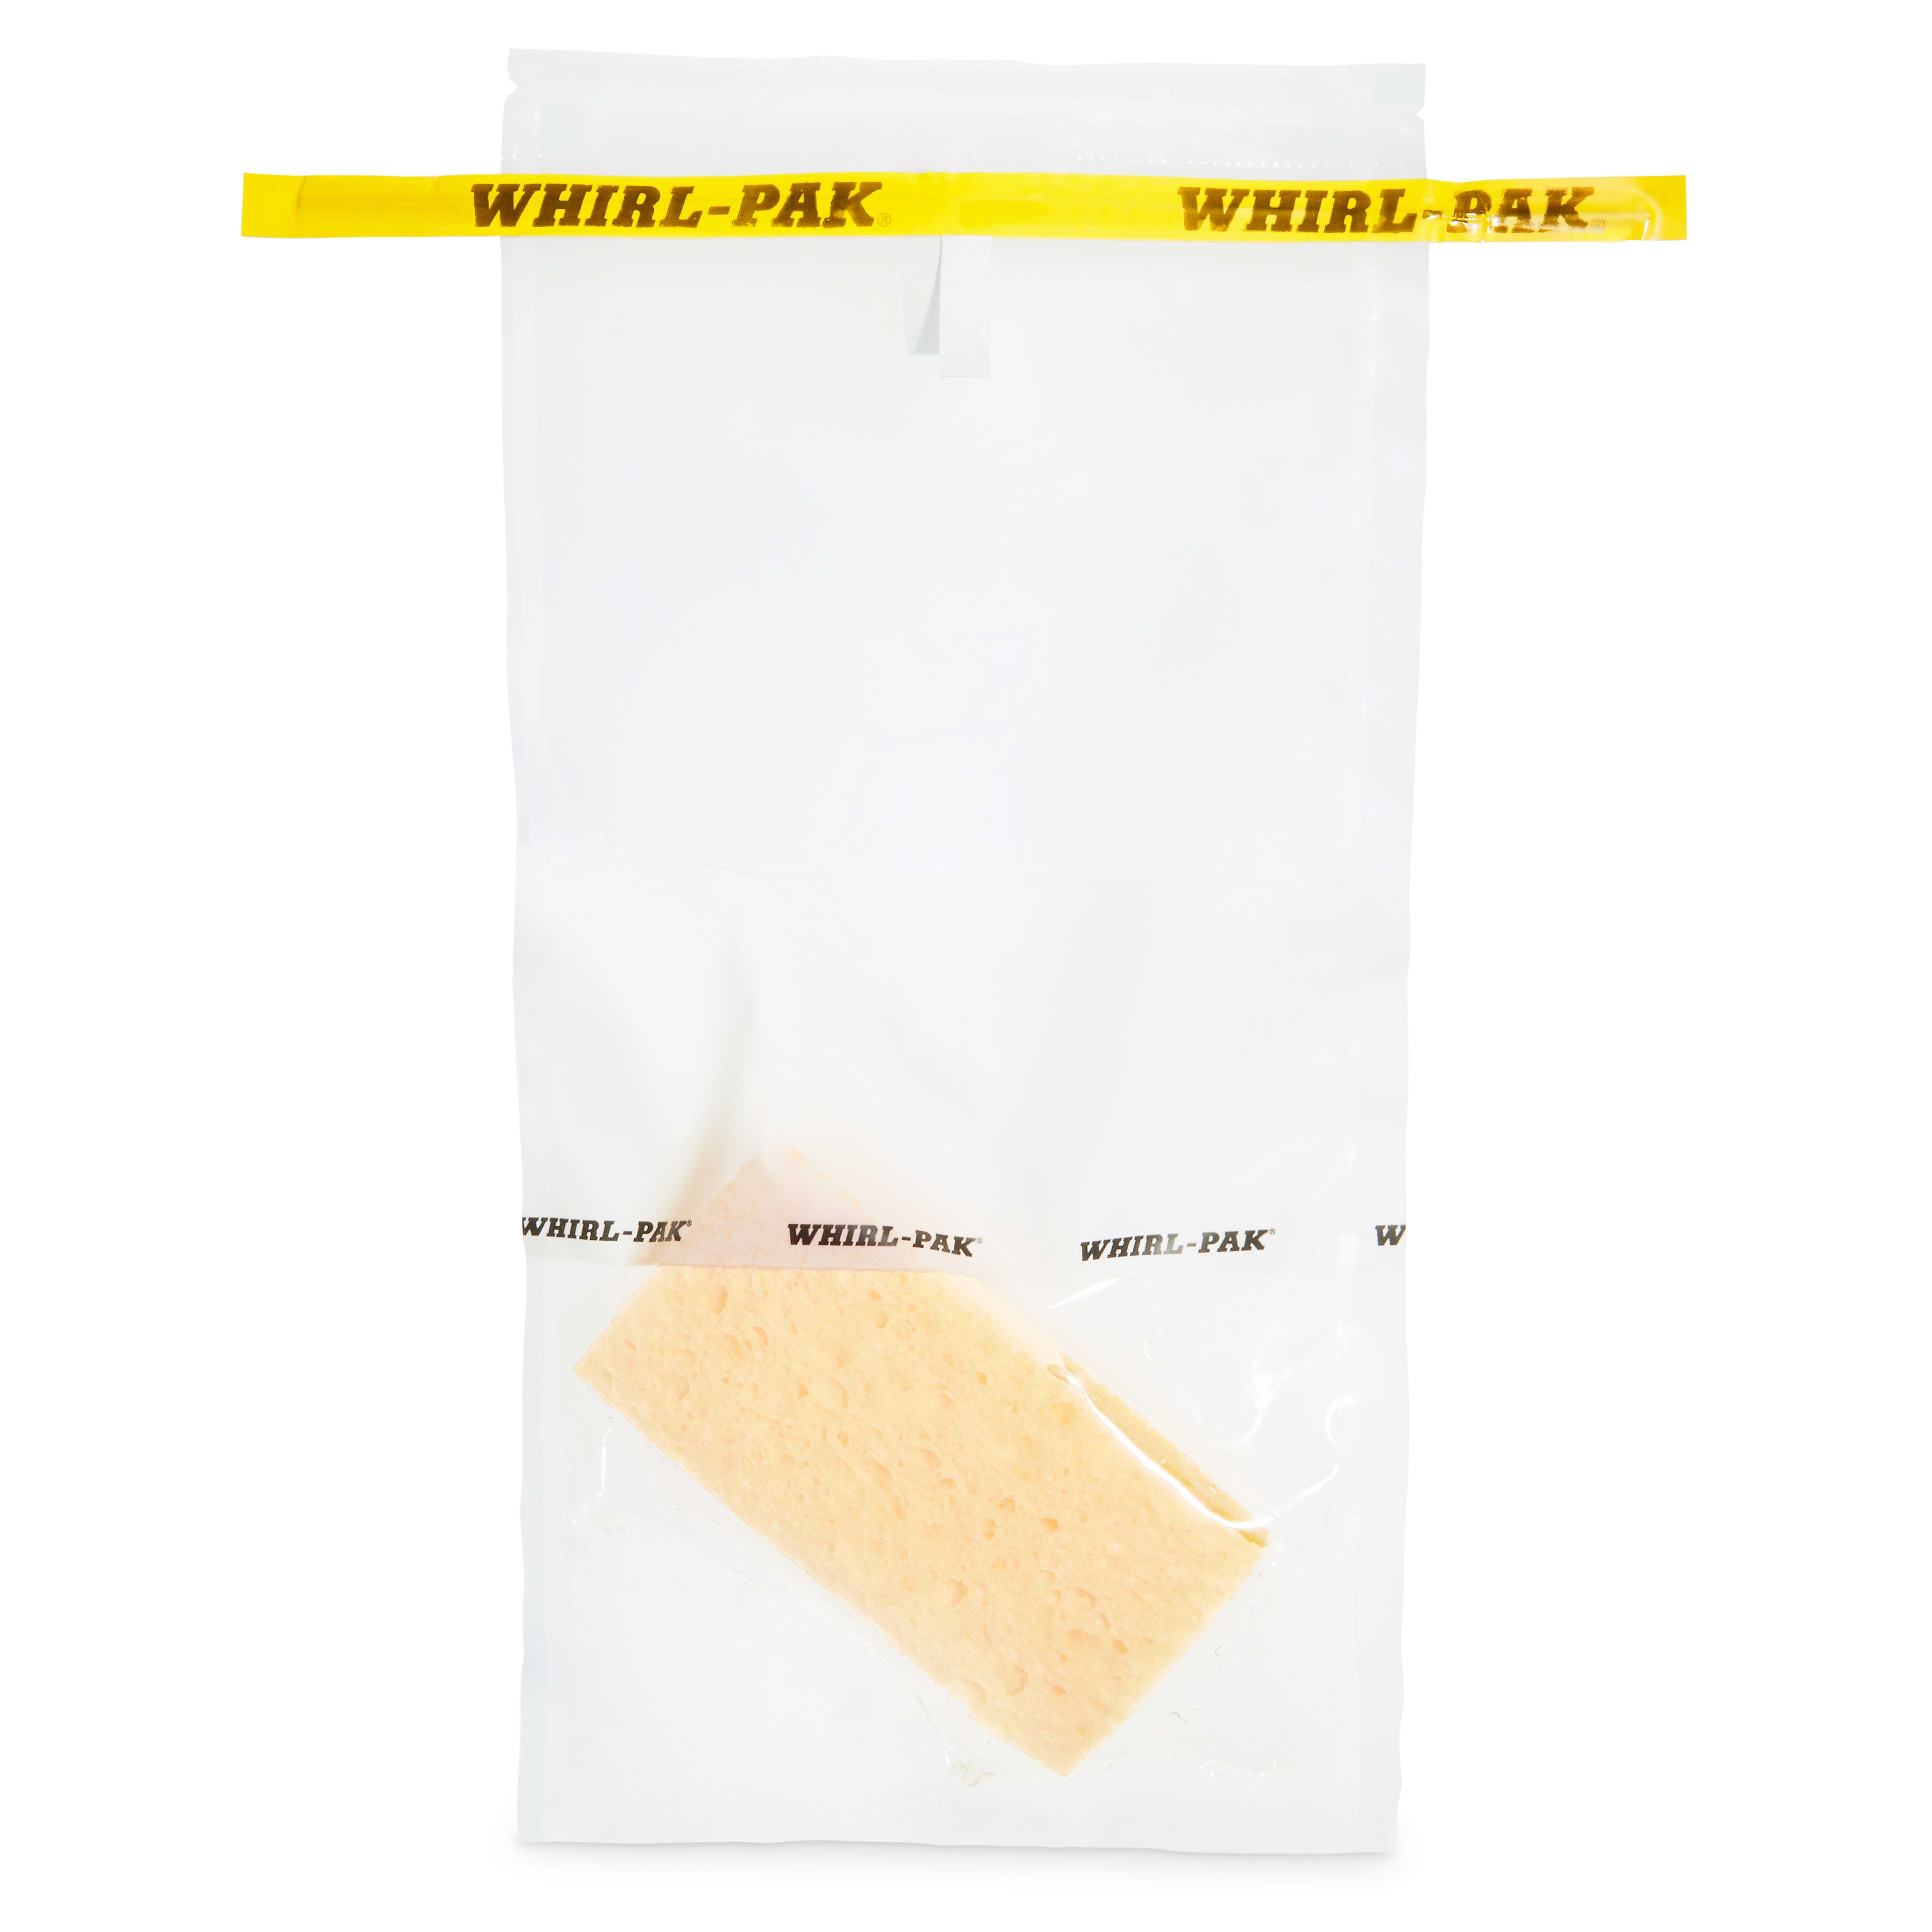 Speci-sponge hydrated sponge for surface samplings. WHIRL-PAK®. Type: Without glove. Cap. (ml): 532. Dim. (mm): 115x230. Gauge (µm): 63